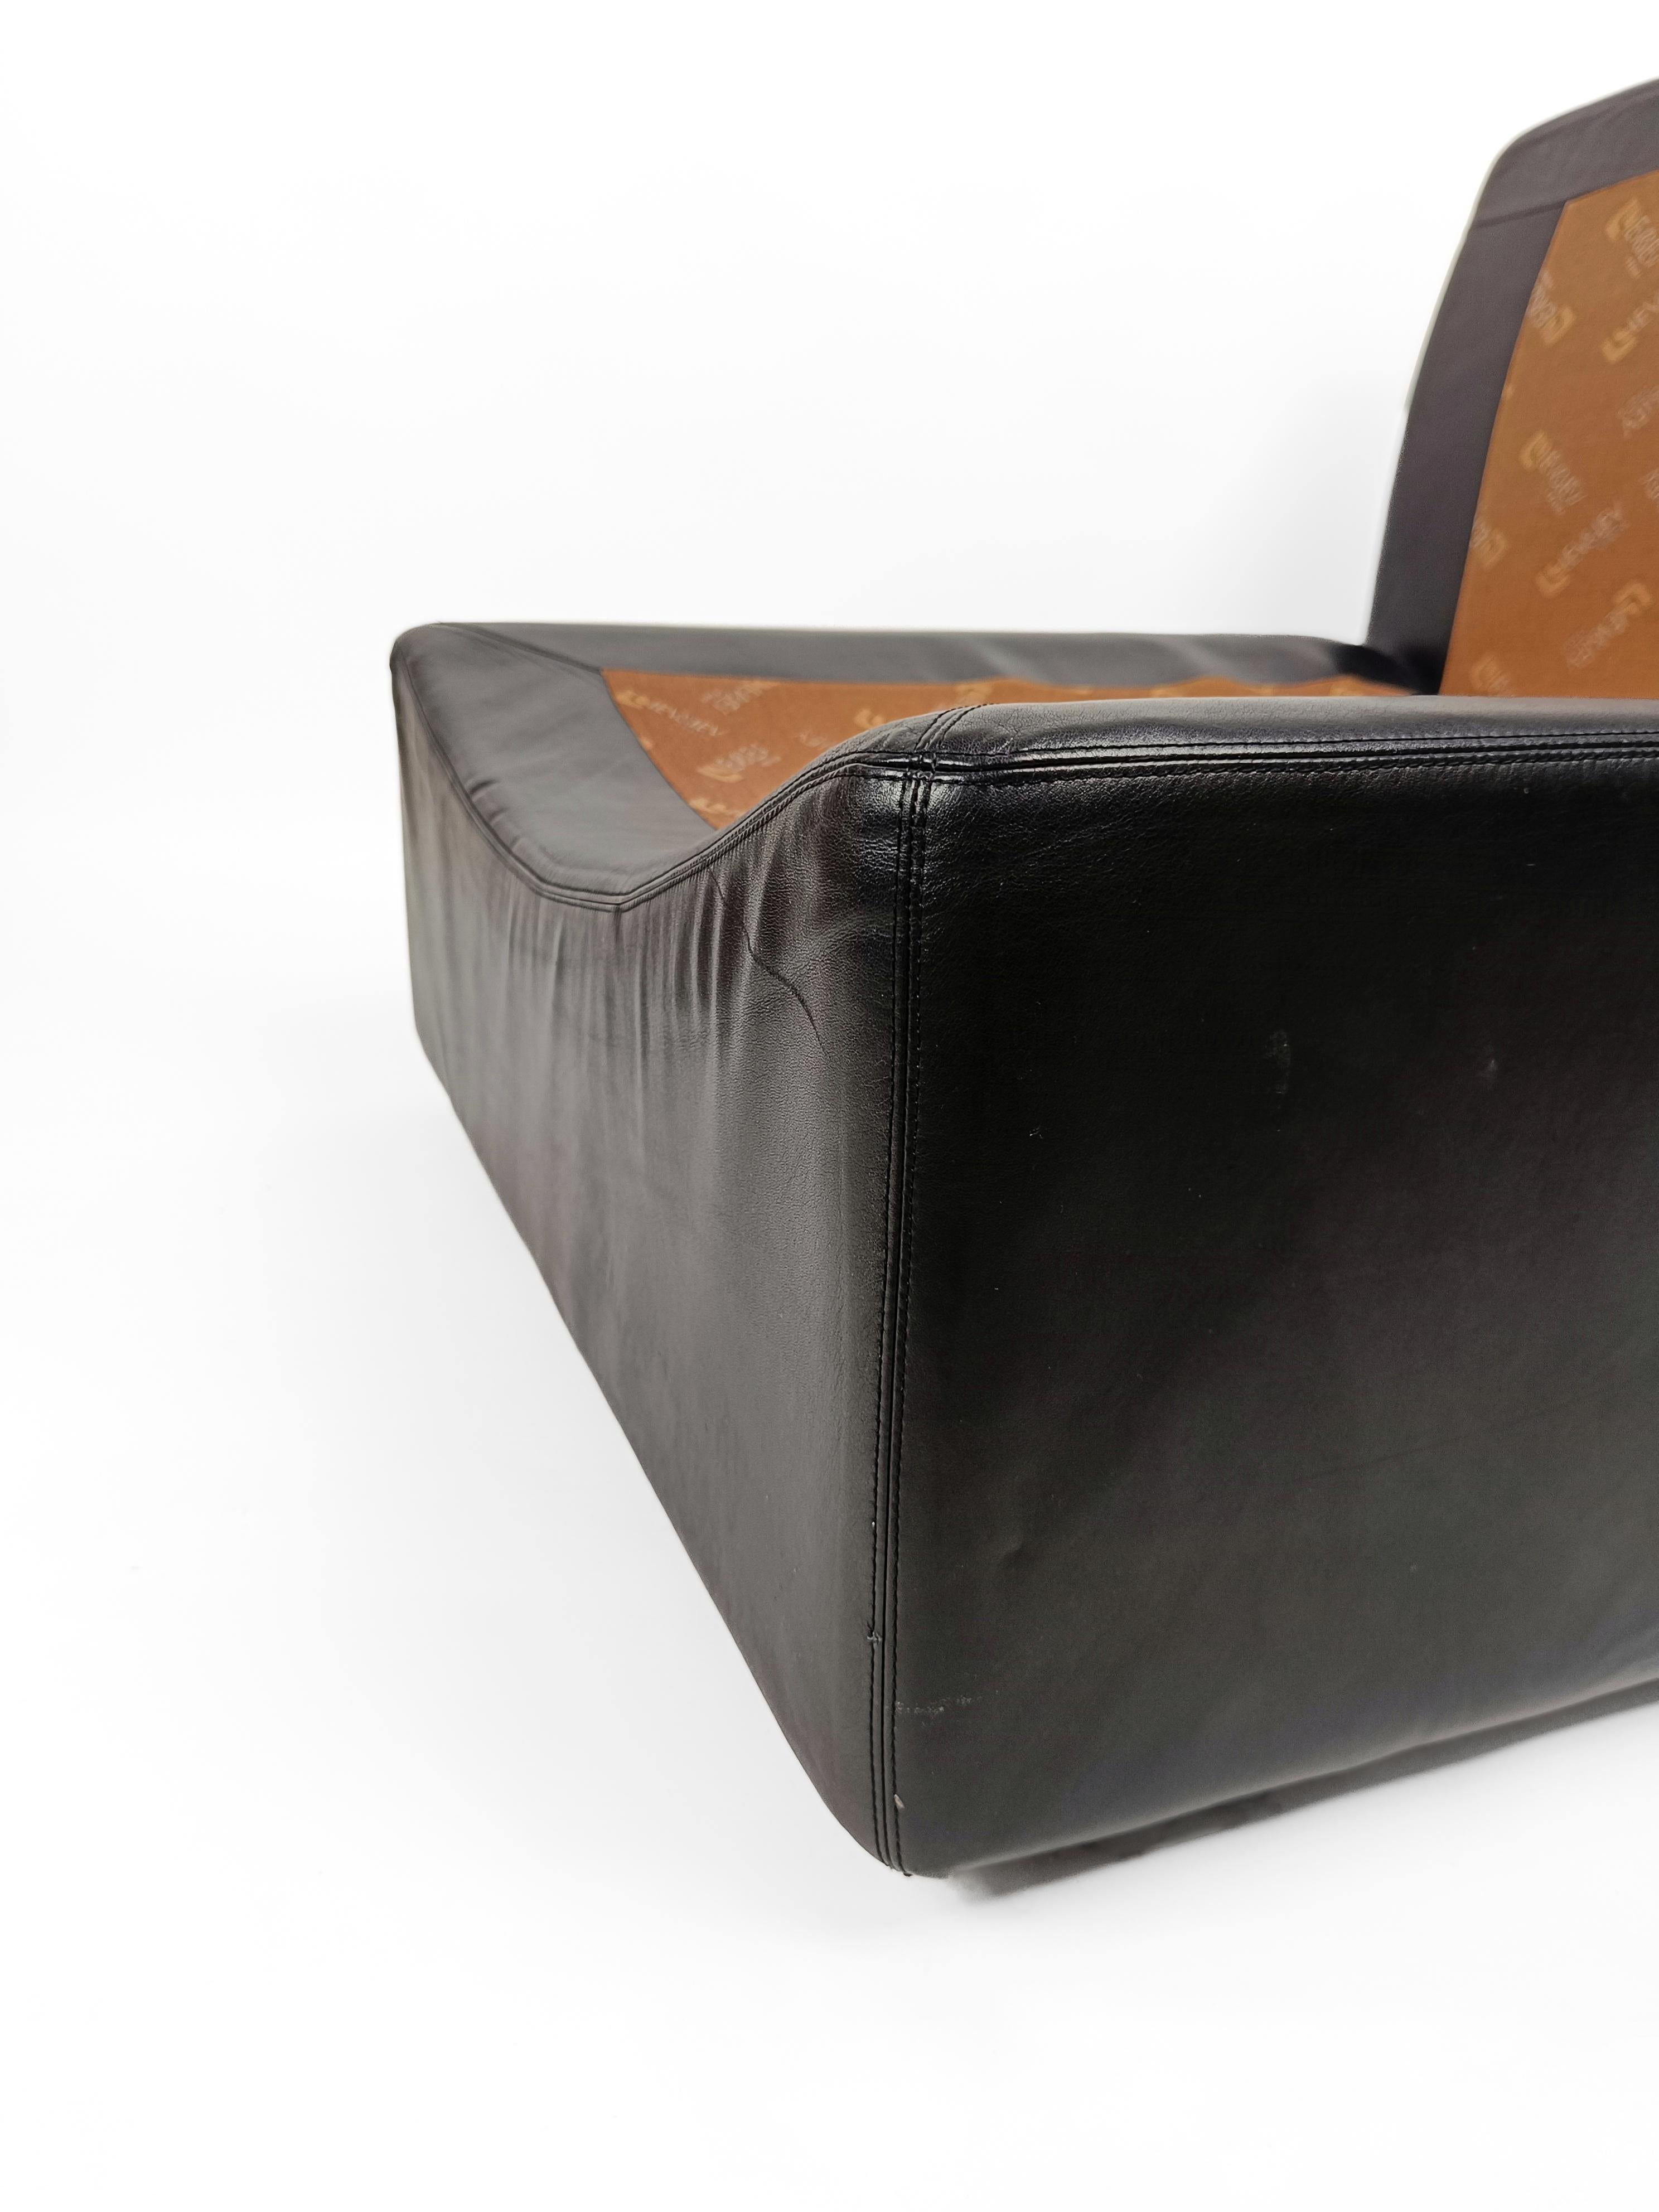 Italian Modular Lounge Chair in Black Leather model PANAREA by Lev & Lev, 1970s  For Sale 5